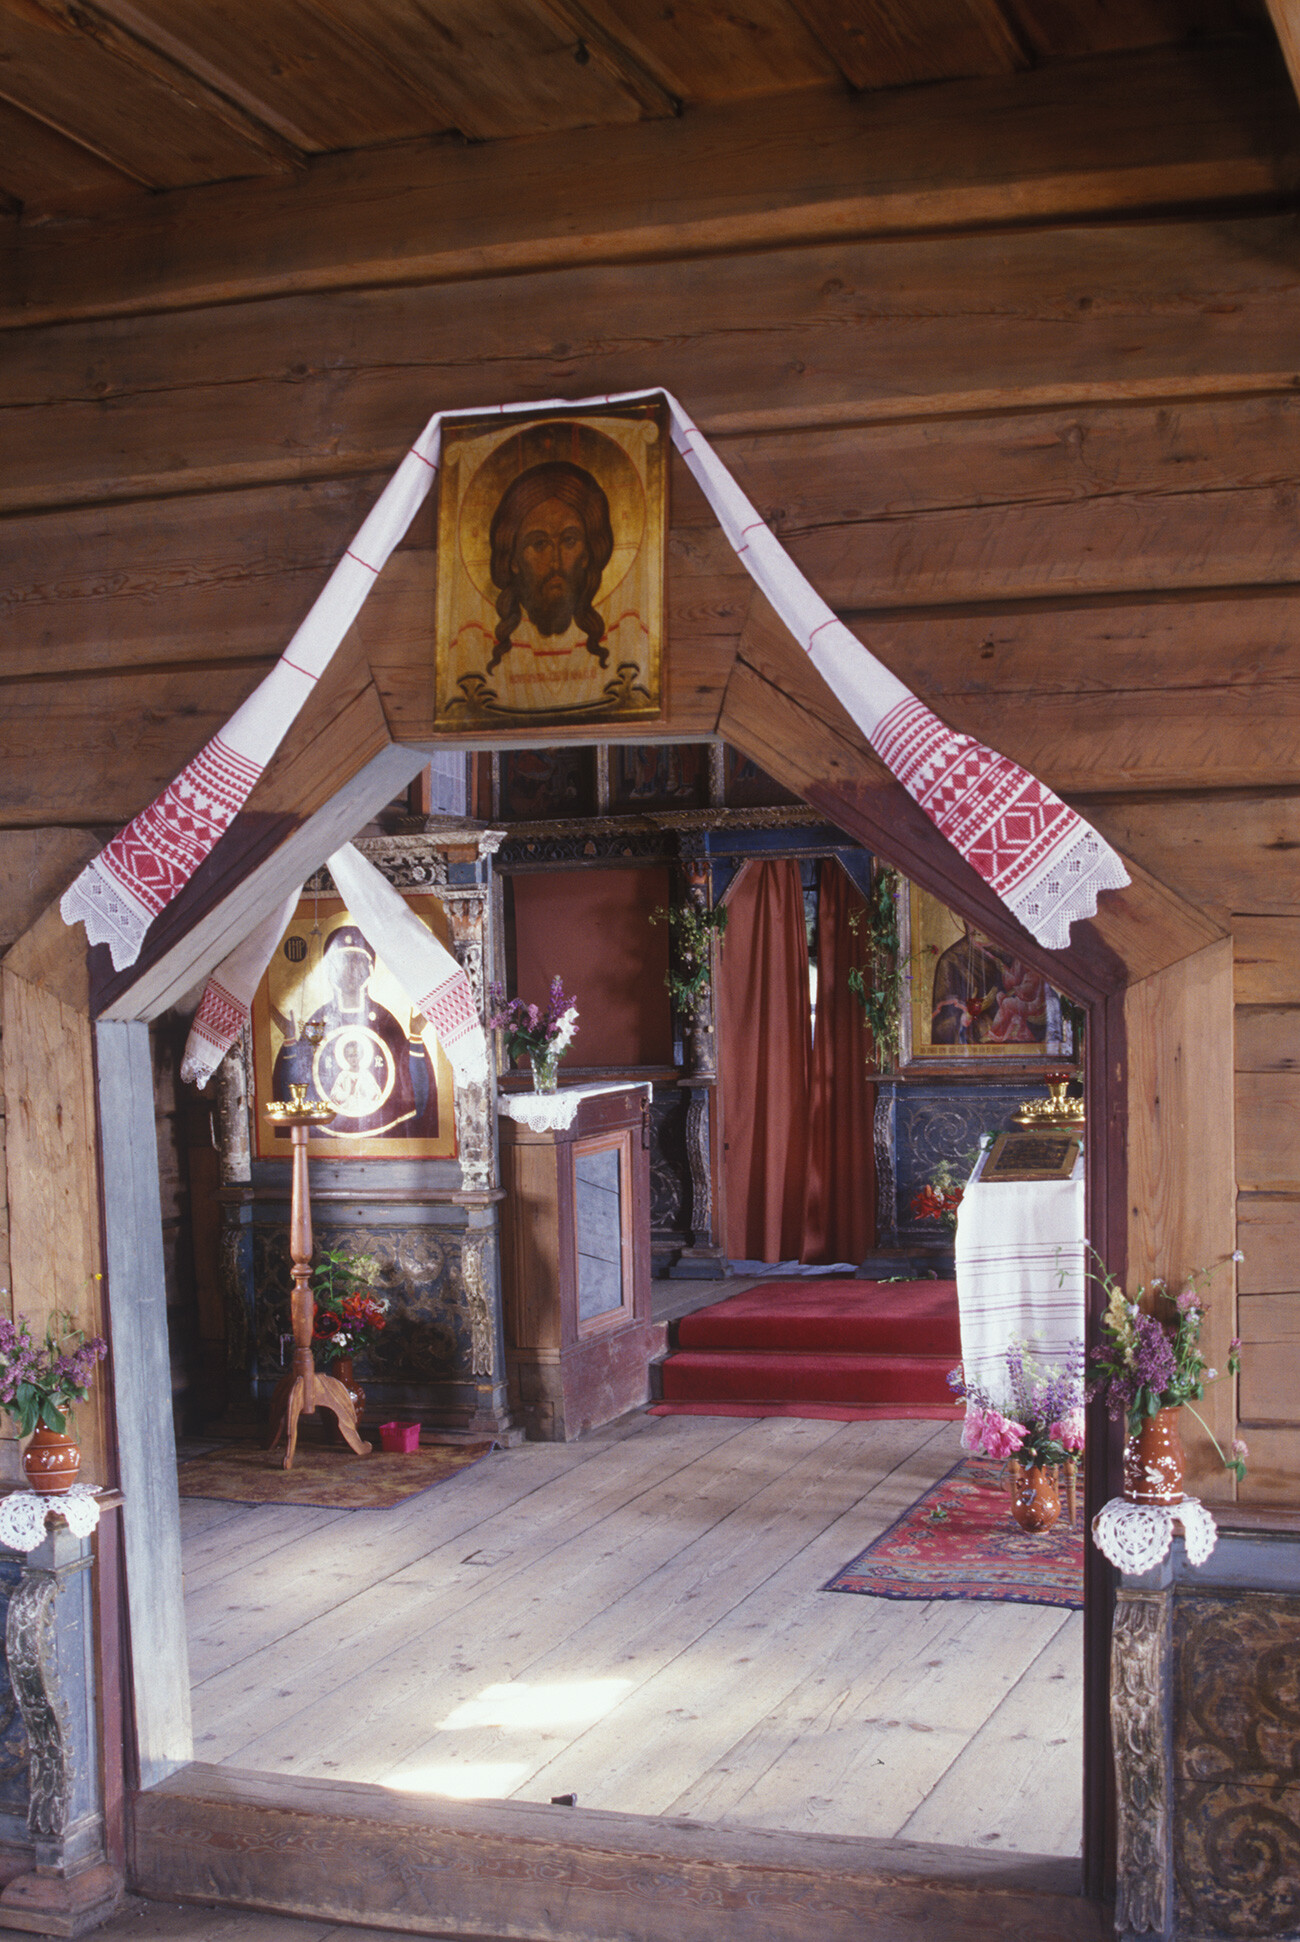 Church of the Dormition. Interior, portal from refectory to main worship space. Note embroidered cloth protecting Miraculous Icon of the Savior. July 4, 2000